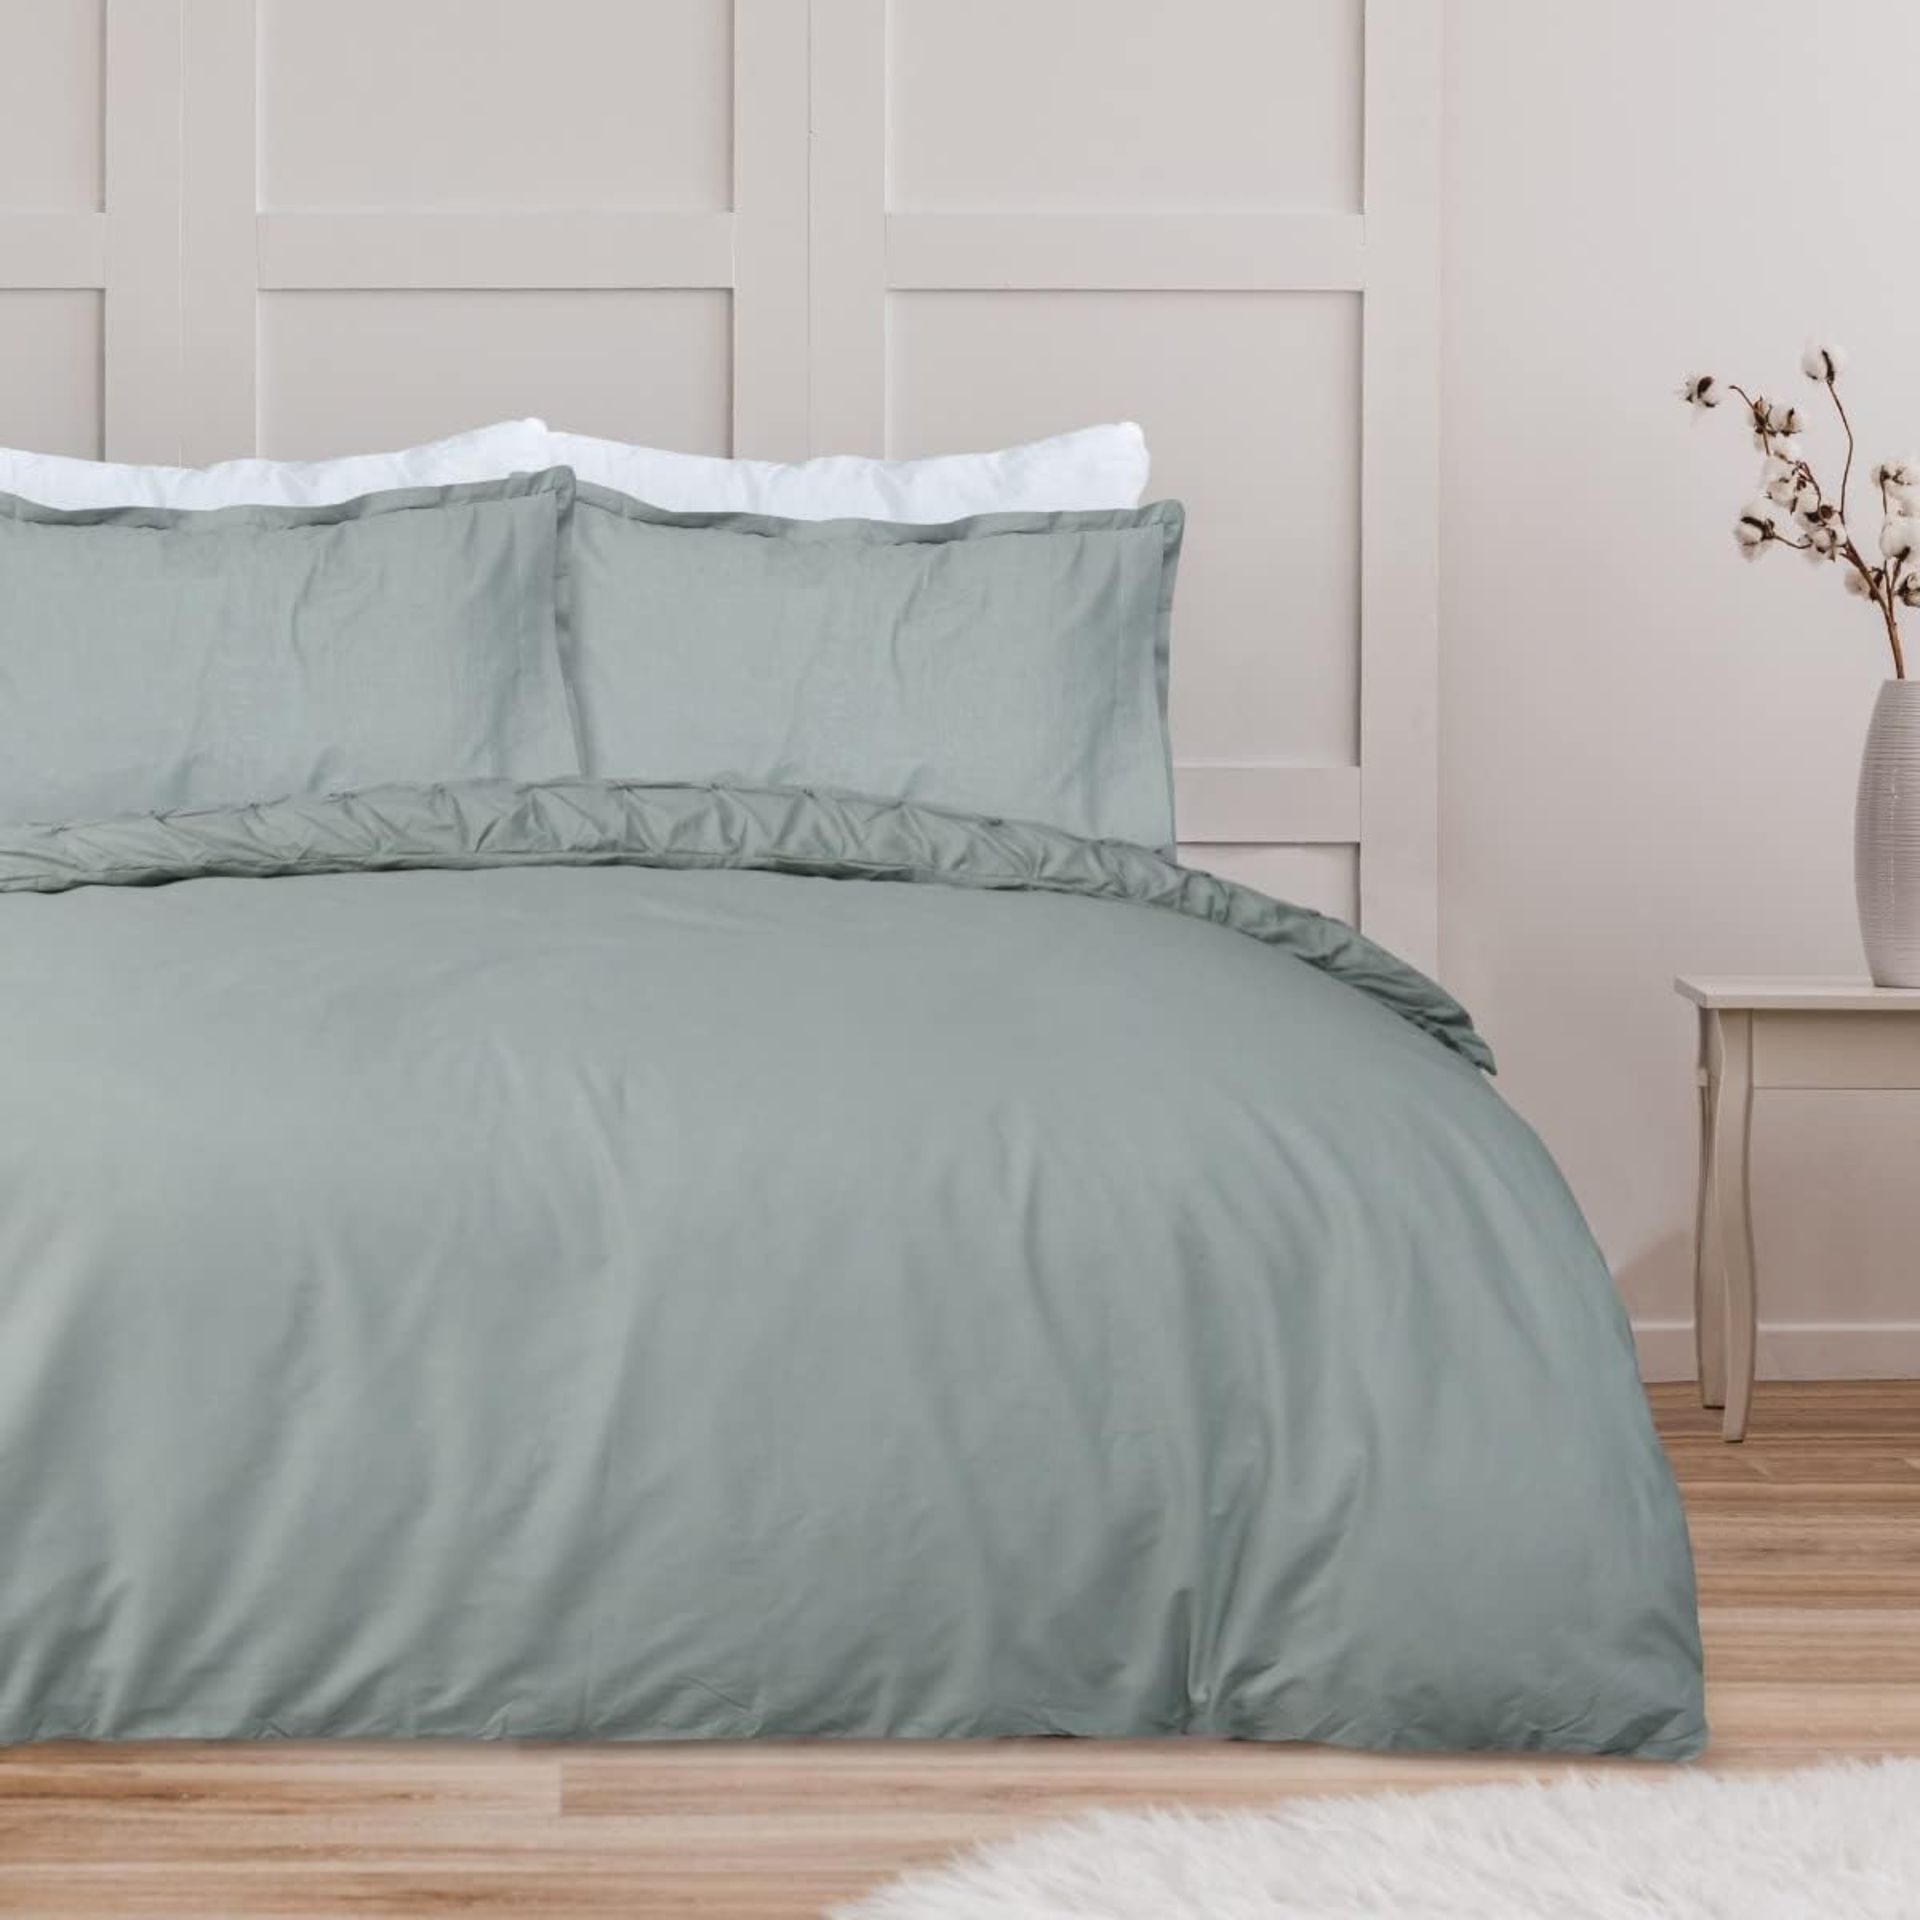 11x NEW & PACKAGED SLEEPDOWN Rouched Easy Care SINGLE Duvet Set - SAGE GREEN. RRP £22.99 EACH. (R7- - Image 2 of 3